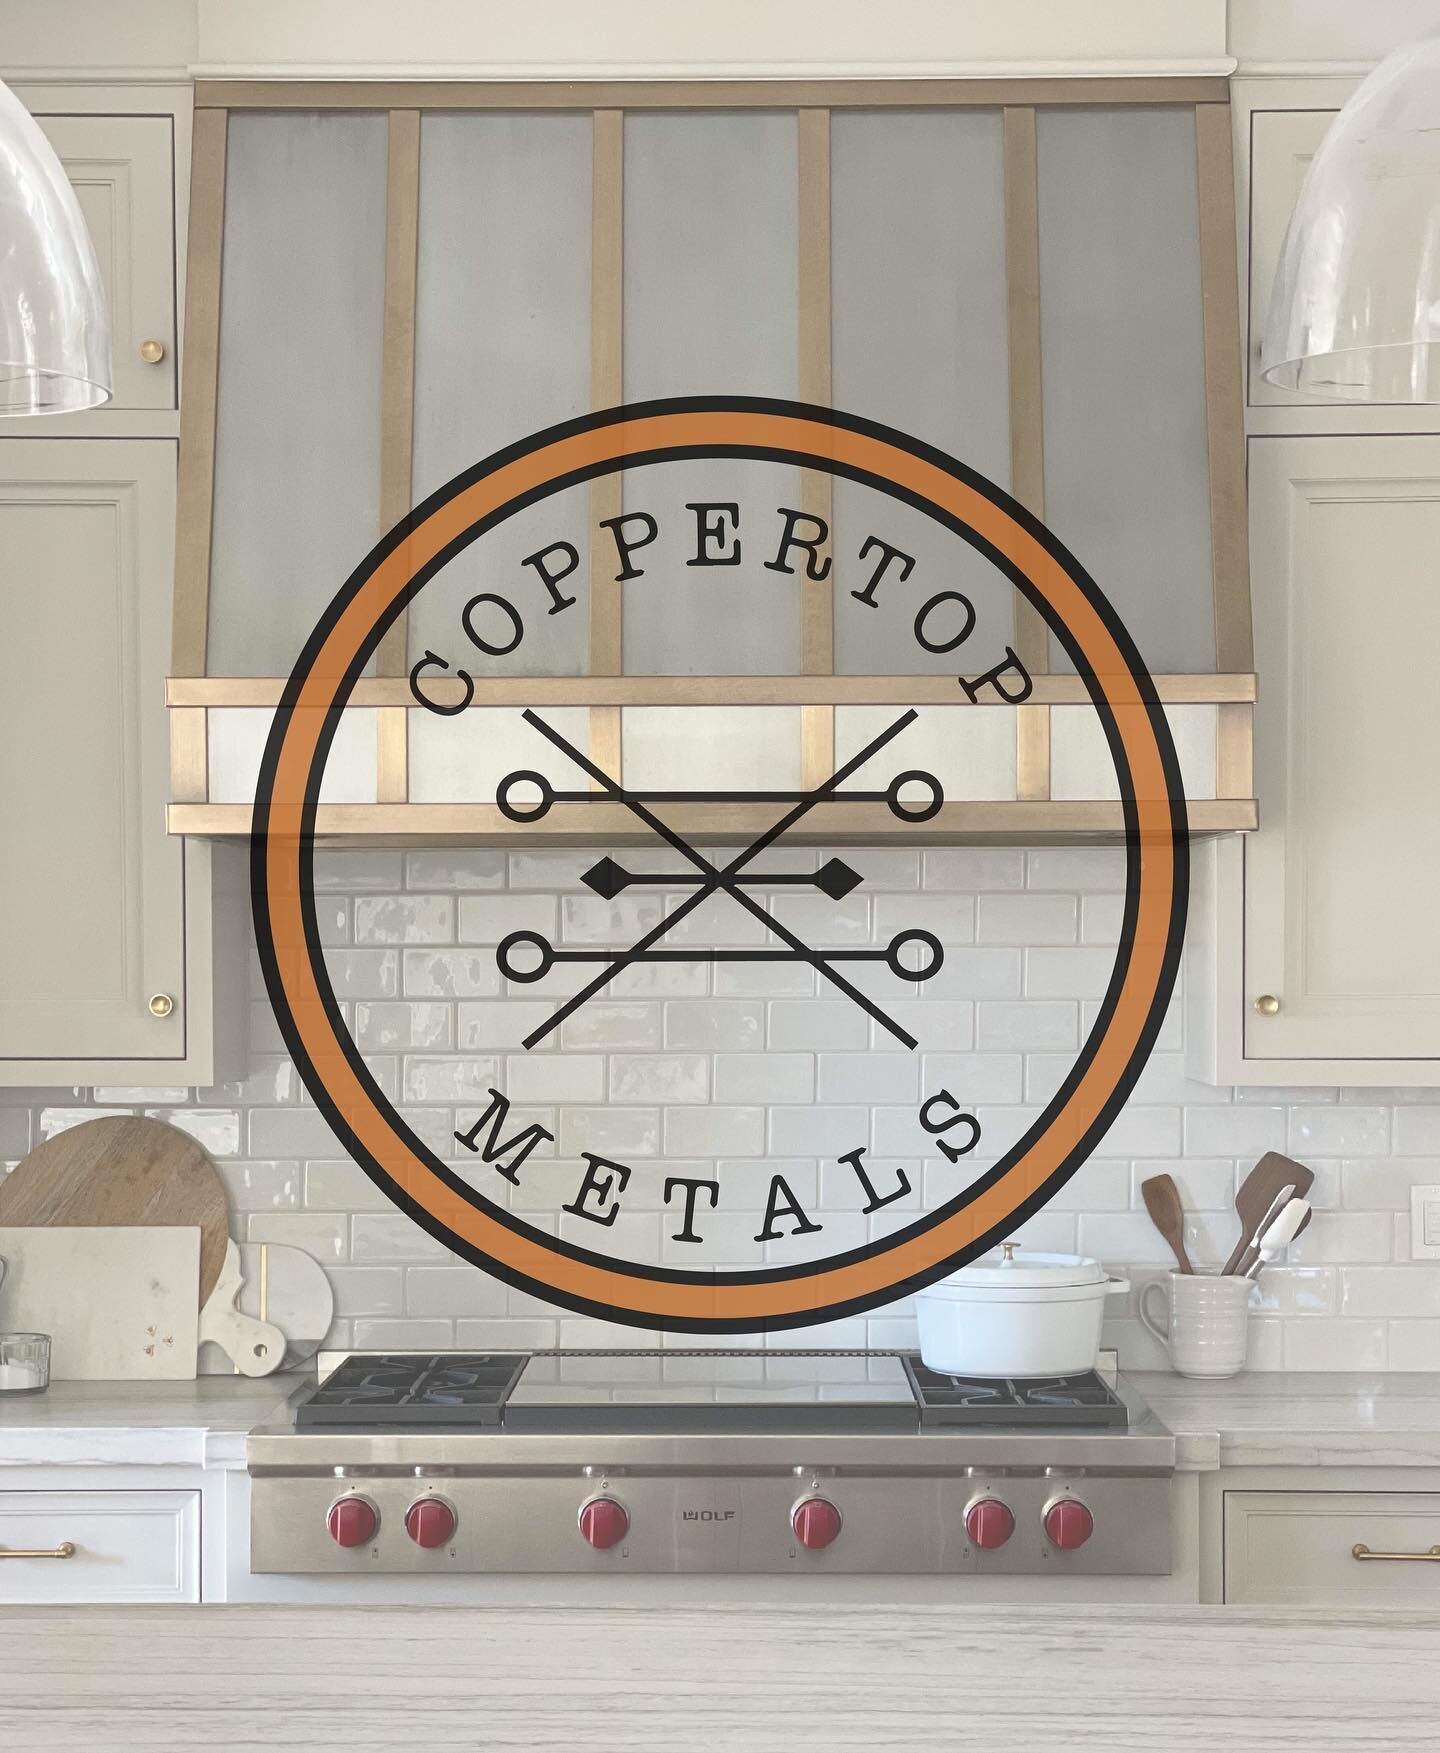 @coppertopmetals provides quality solutions for any metal fabrication. Their hand crafted products are perfect for any residential or commercial job. They&rsquo;ll be a great addition to the foundry.